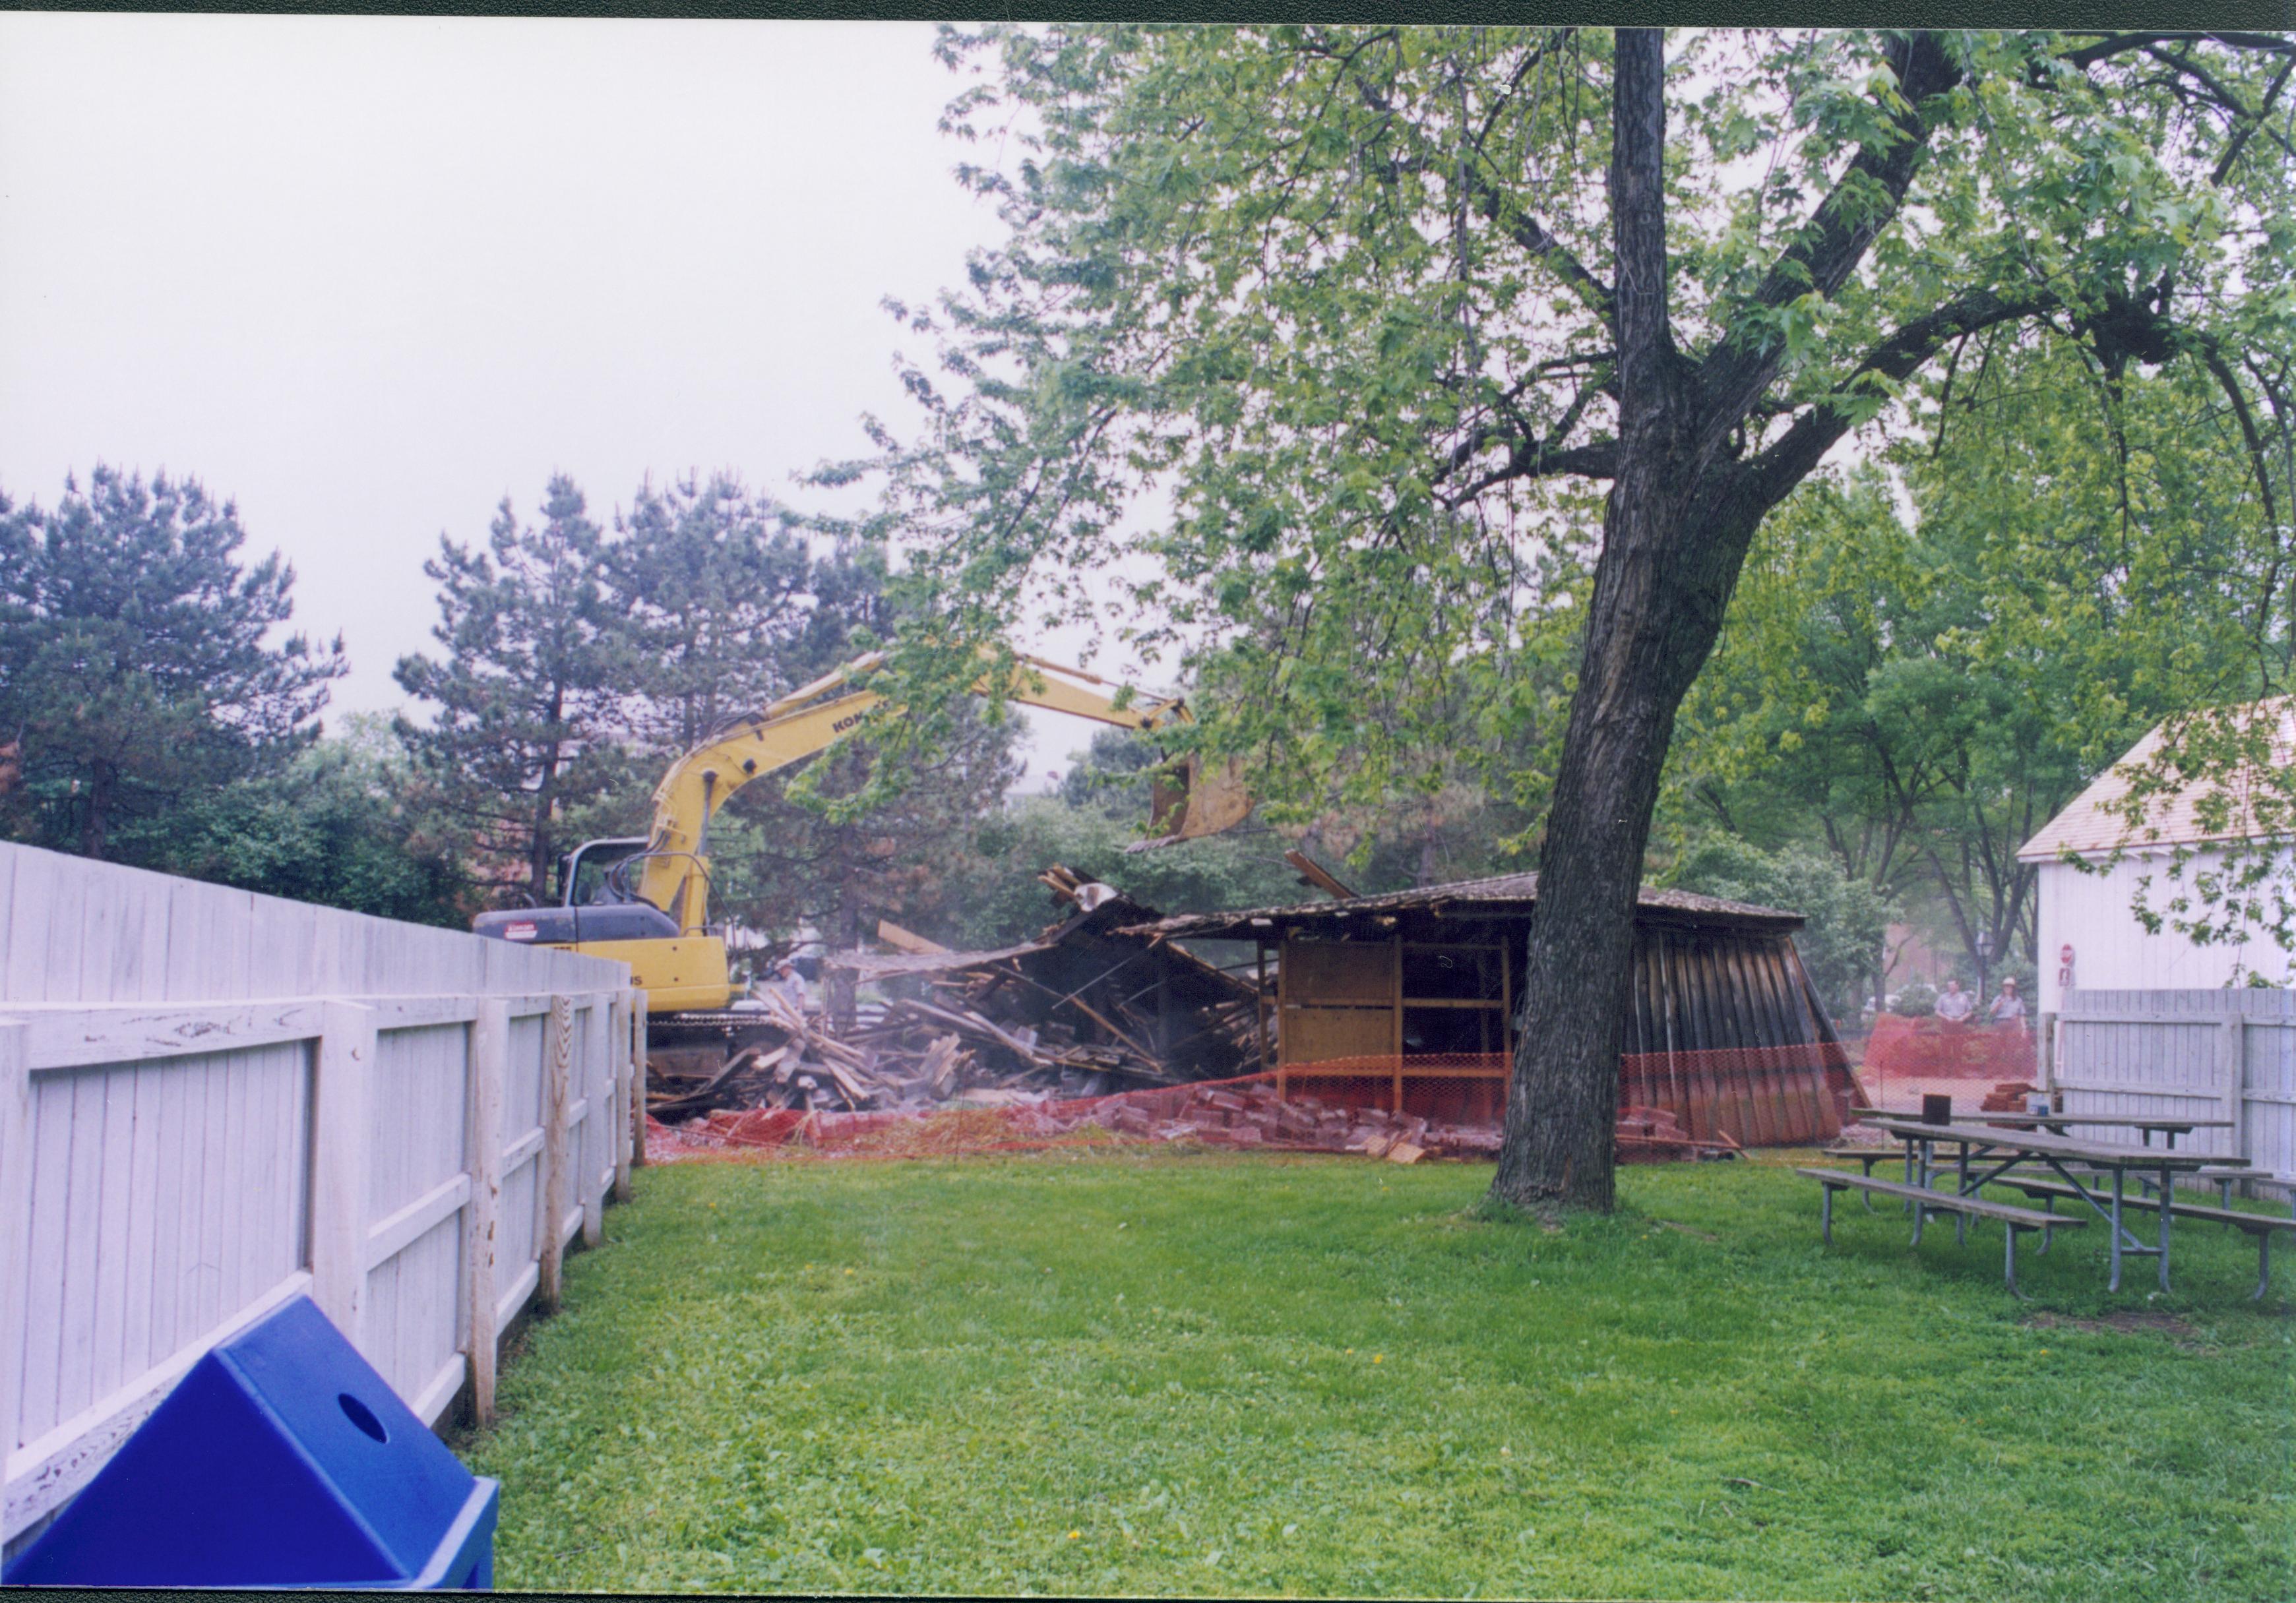 Maintenance Shed removal - Sprigg shed tear bown on non-historic barn. Maintenance Work Leader Vee Pollock operates crane. New Corneau Barn in background far right. Rangers David Wachtveitl and Christy Lindberg watch in far background right. Visitor Parking lot in far background. Looking West from Sprigg backyard Sprigg, shed, demolition, Corneau Barn, staff, parking lot